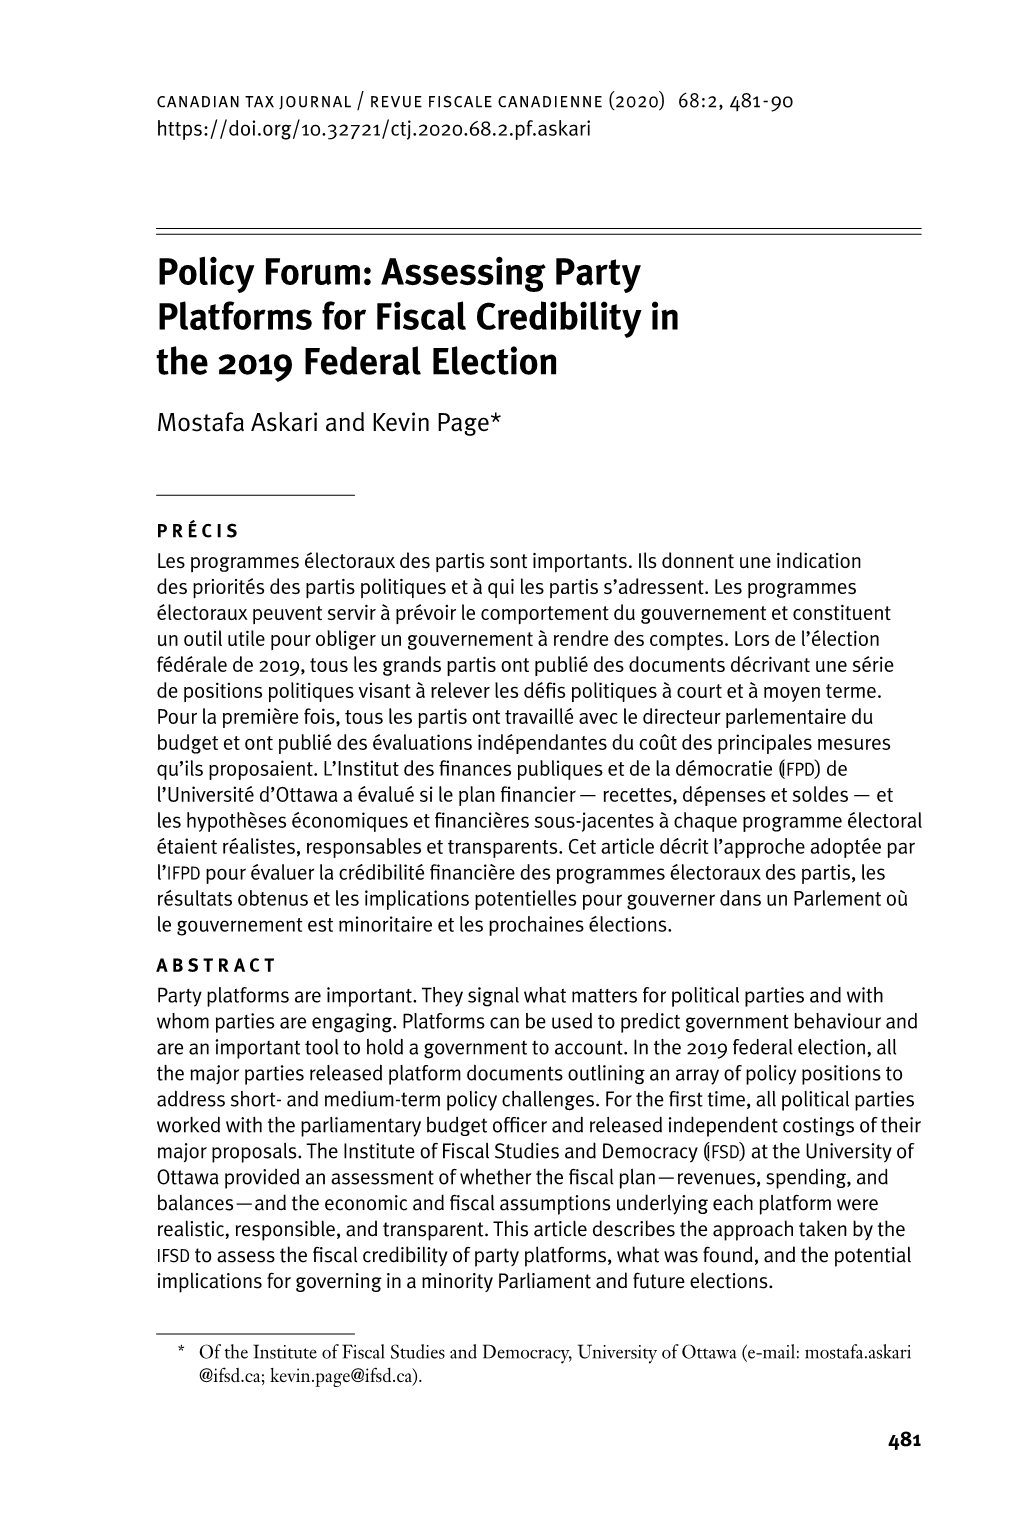 Policy Forum: Assessing Party Platforms for Fiscal Credibility in the 2019 Federal Election